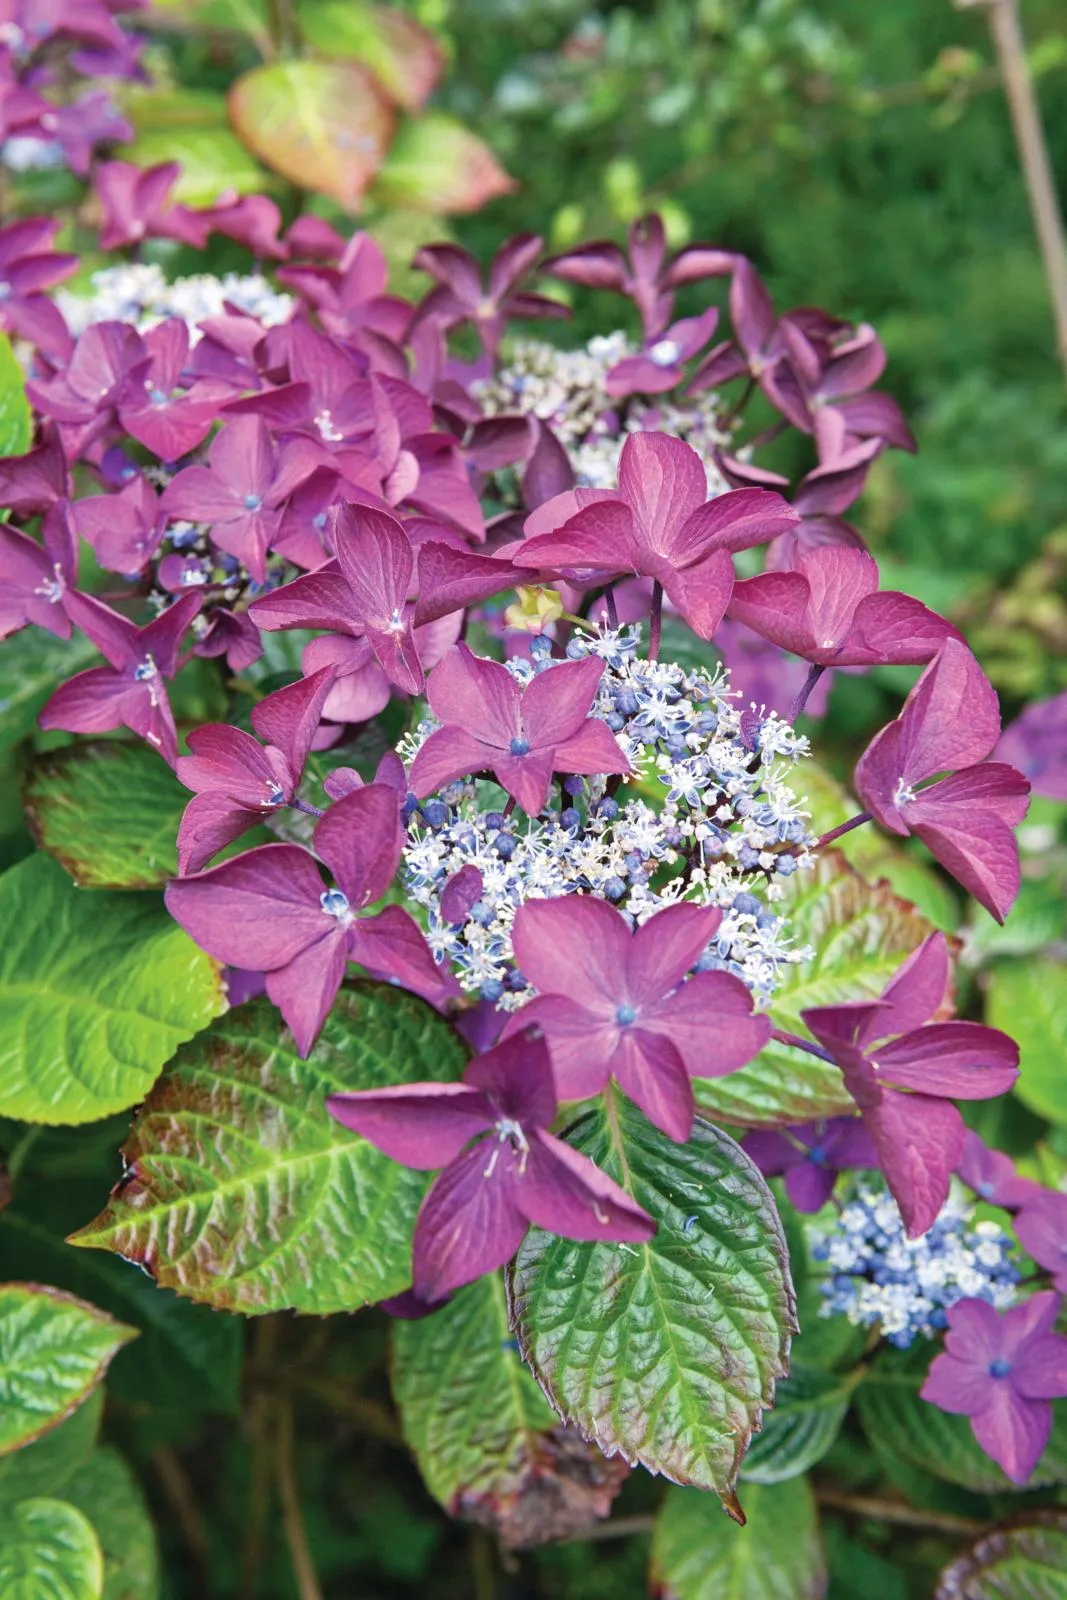 Hydrangea macrophylla ‘Rotschwanz’ is a striking lacecap hydrangea with dark-green leaves flushed red.